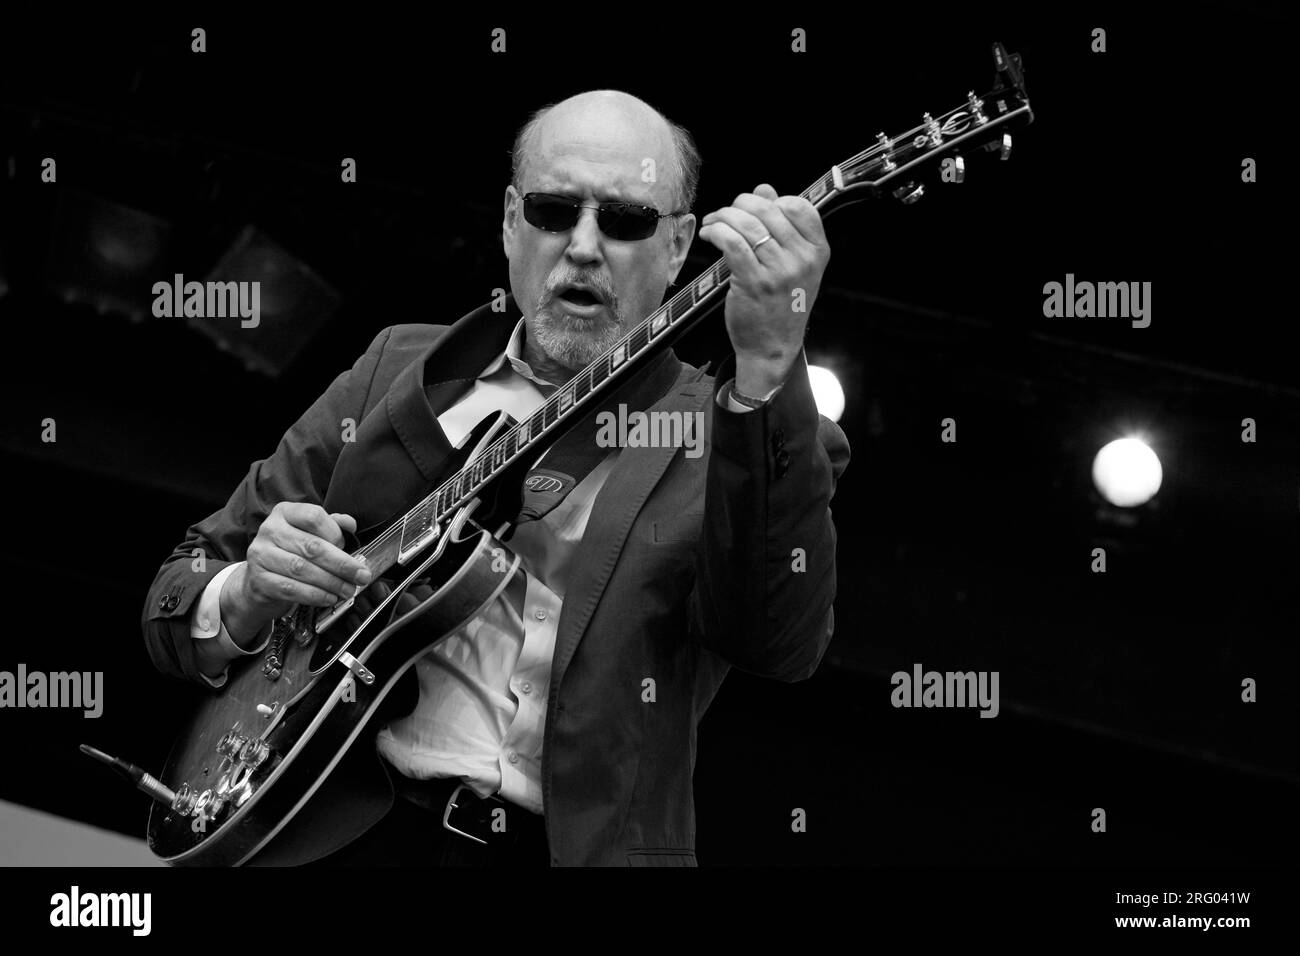 Musical artist jazz guitarist Black and White Stock Photos & Images - Alamy